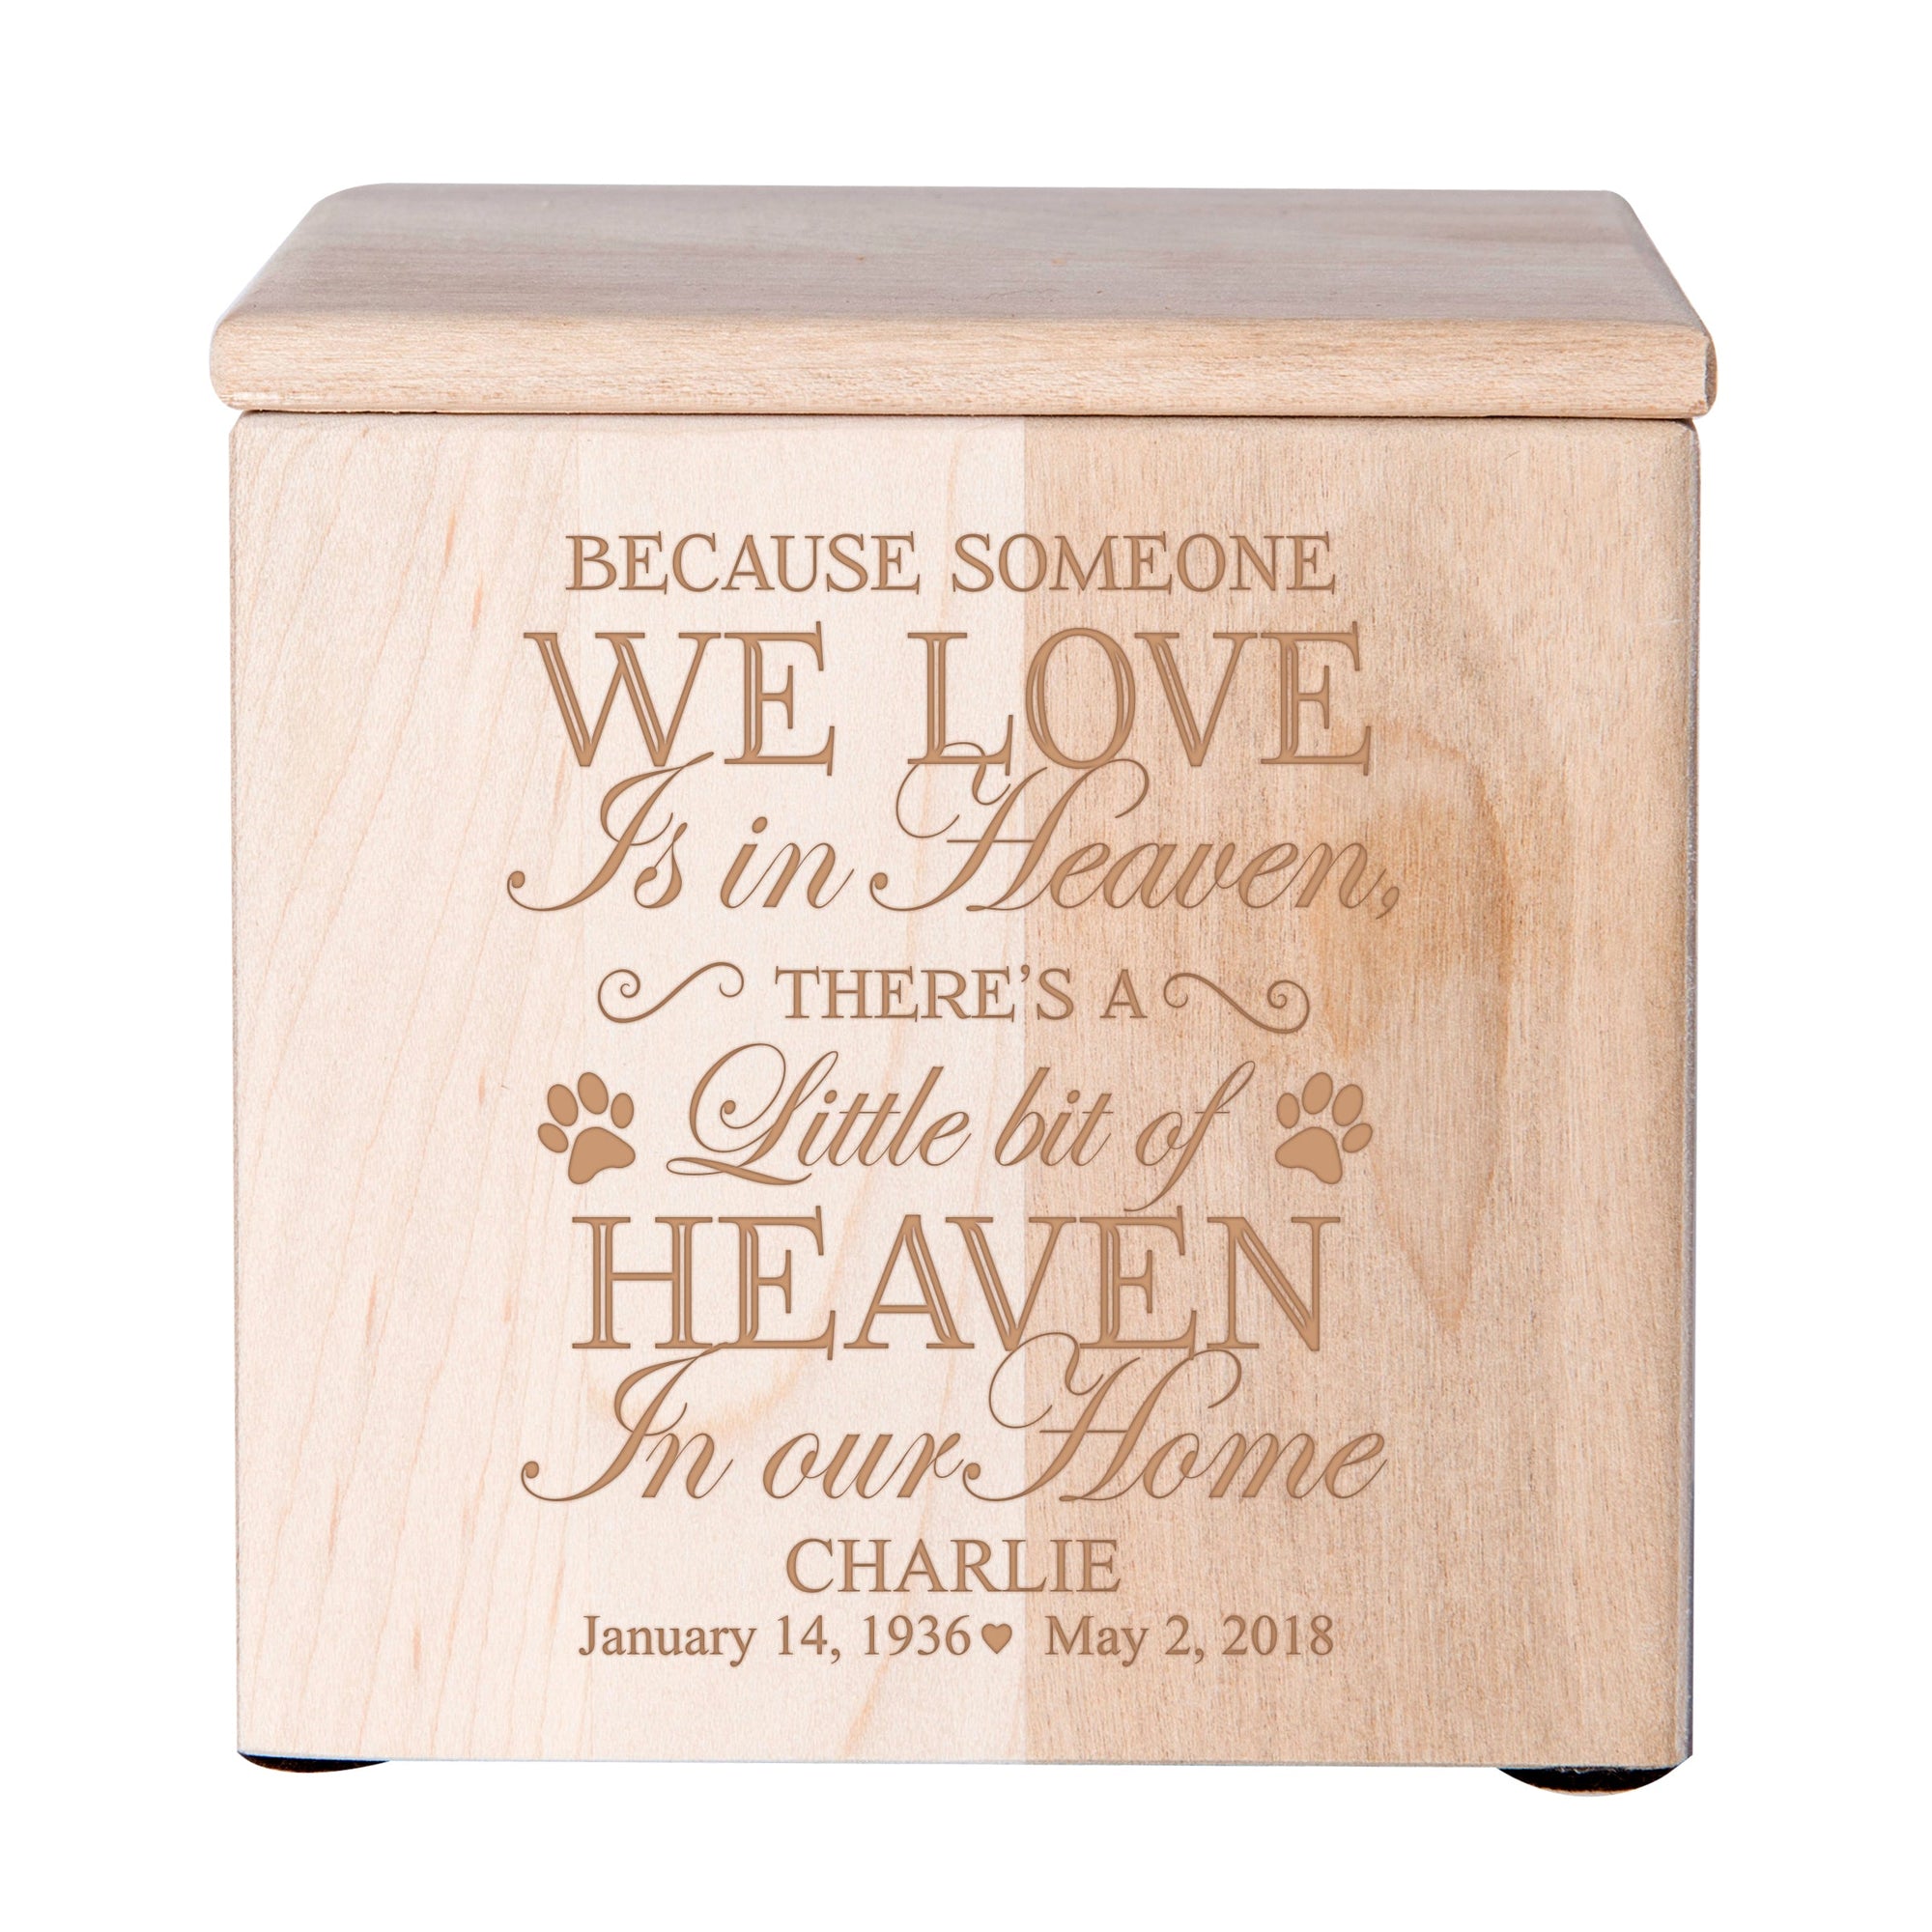 Pet Memorial Keepsake Cremation Urn Box for Dog or Cat - Because Someone We Love Is In Heaven